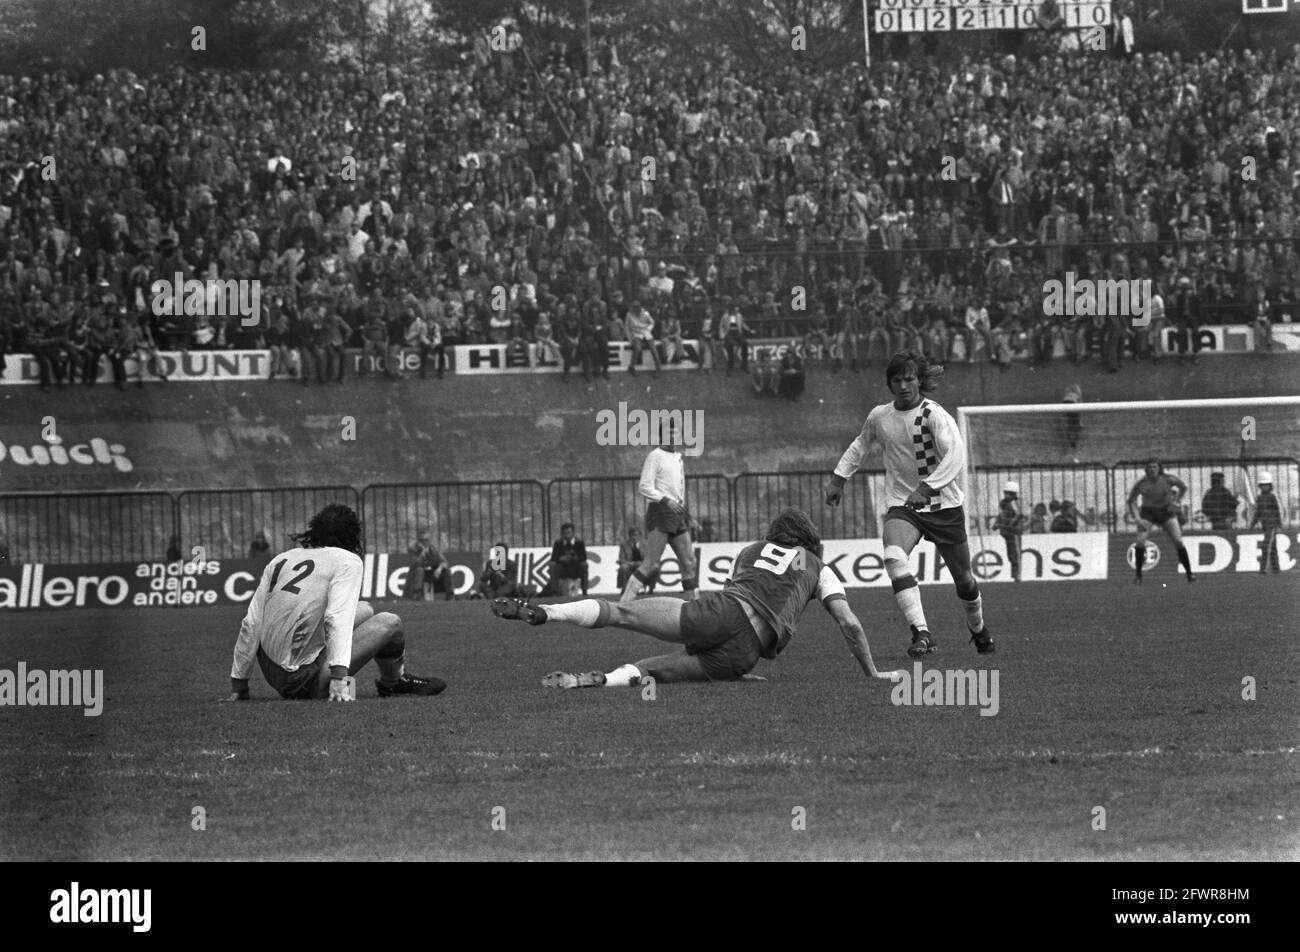 NEC v Feyenoord 0-2, game moments, 28 April 1974, soccer, The Netherlands, 20th century press agency photo, news to remember, documentary, historic photography 1945-1990, visual stories, human history of the Twentieth Century, capturing moments in time Stock Photo